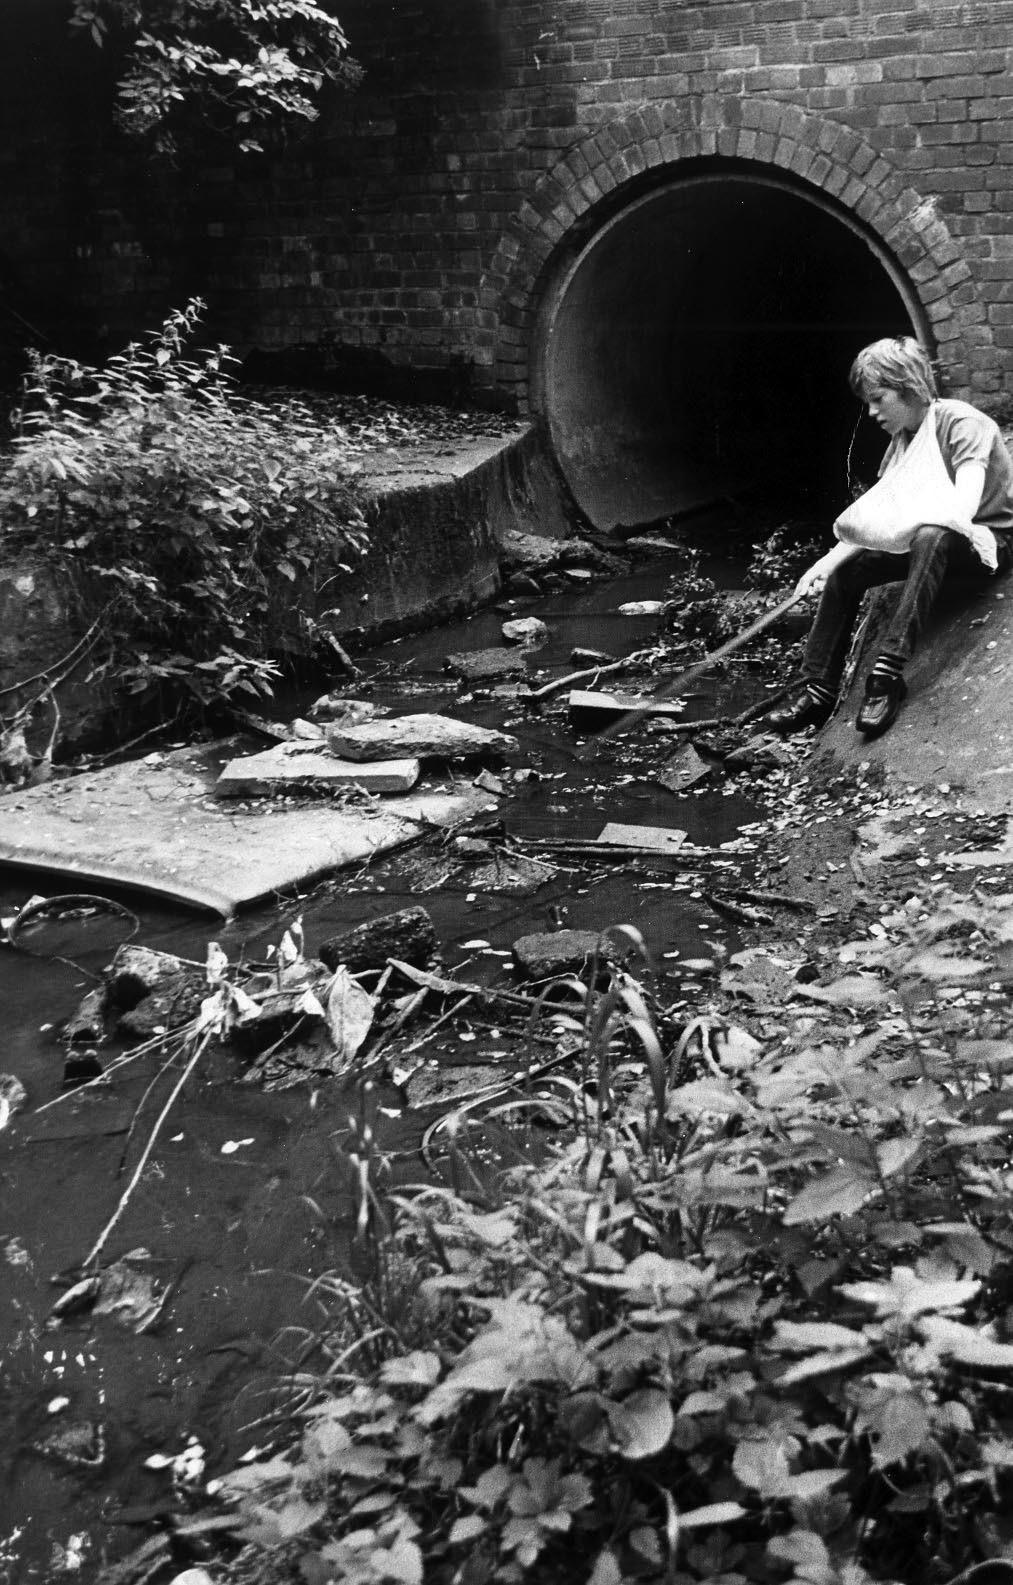 LOVED the style of reporting in this August 1973 story of rubbish piling up in Duck Brook, Cherry Orchard, Worcester. The residents were up in arms because the water flow was being blocked by wood from dead trees, undergrowth and “vast amounts of metal 